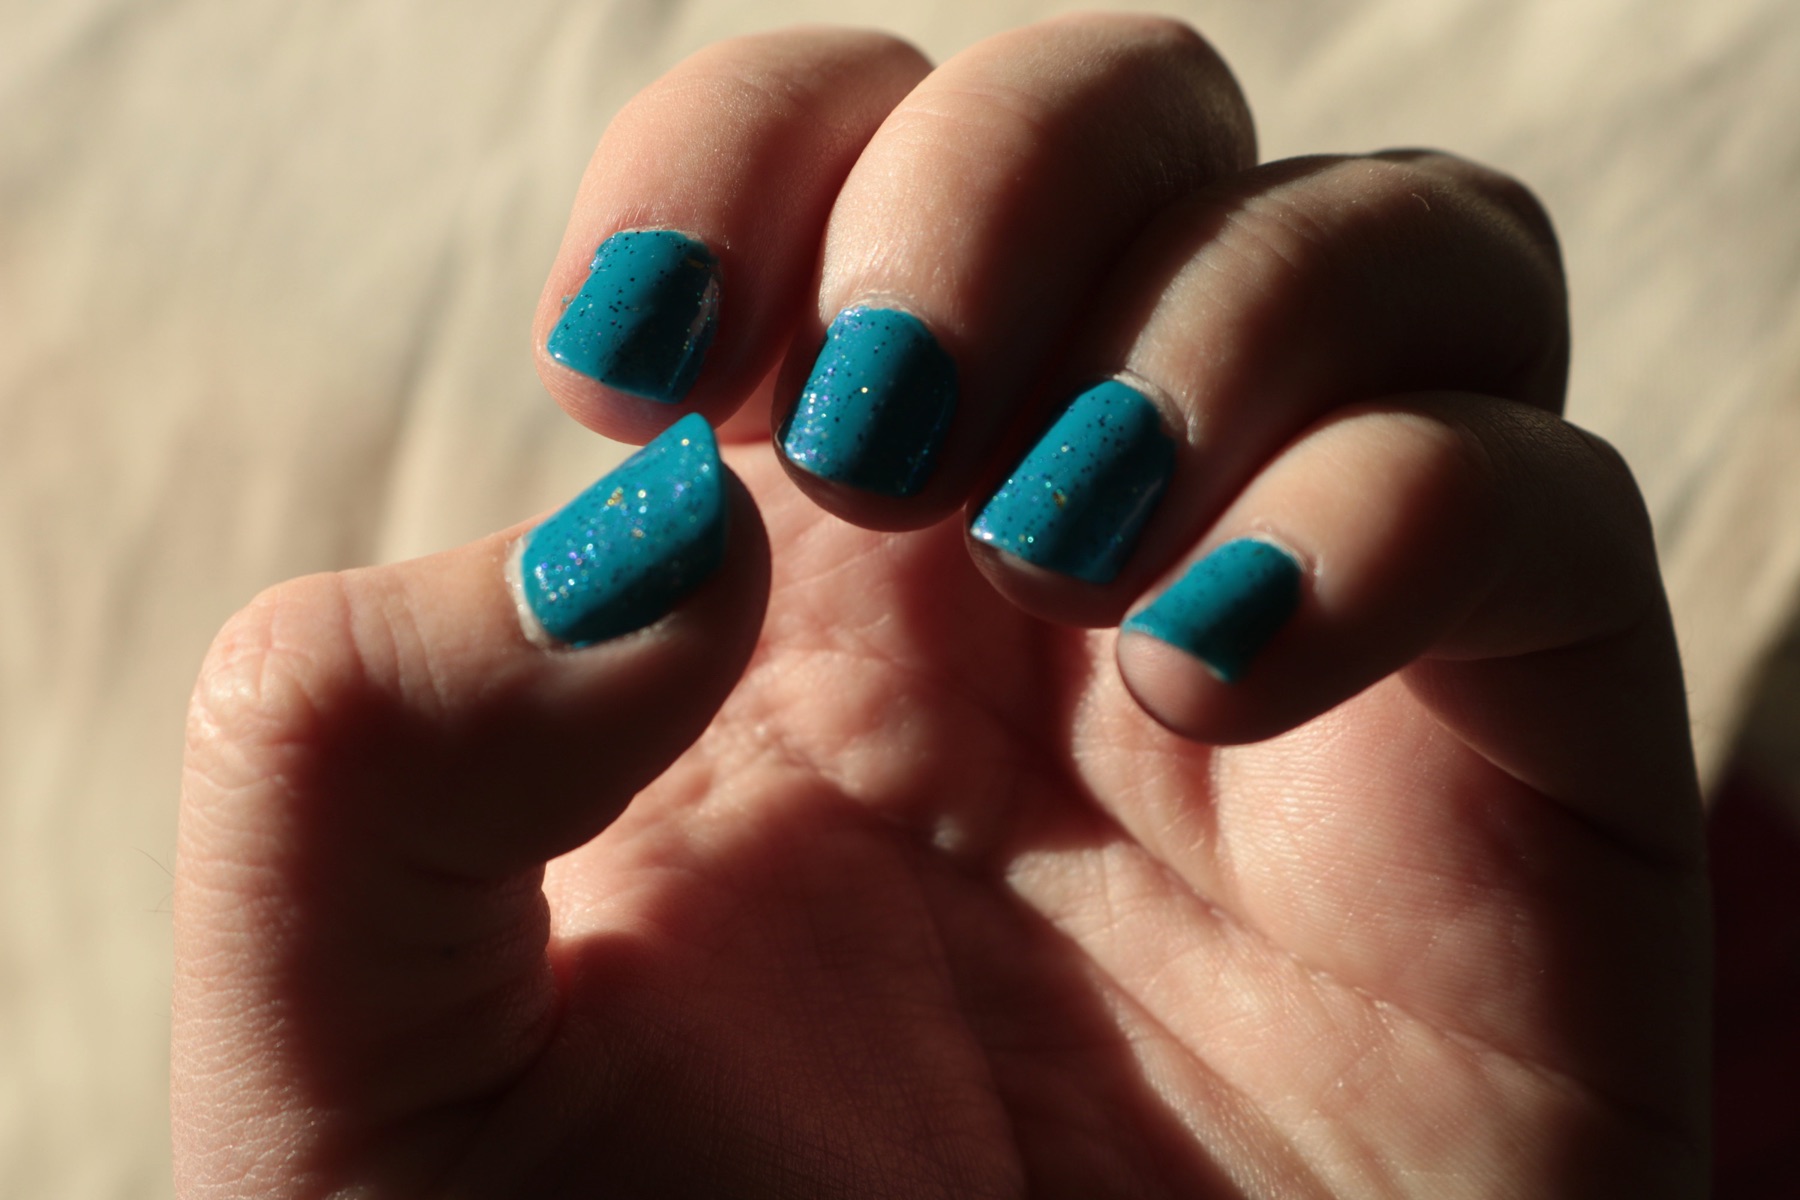 L.A. Colors “Aquatic” as a greenish-blue solid-color ground for Defy & Inspire “Challenge Your Limits” glitter polish.